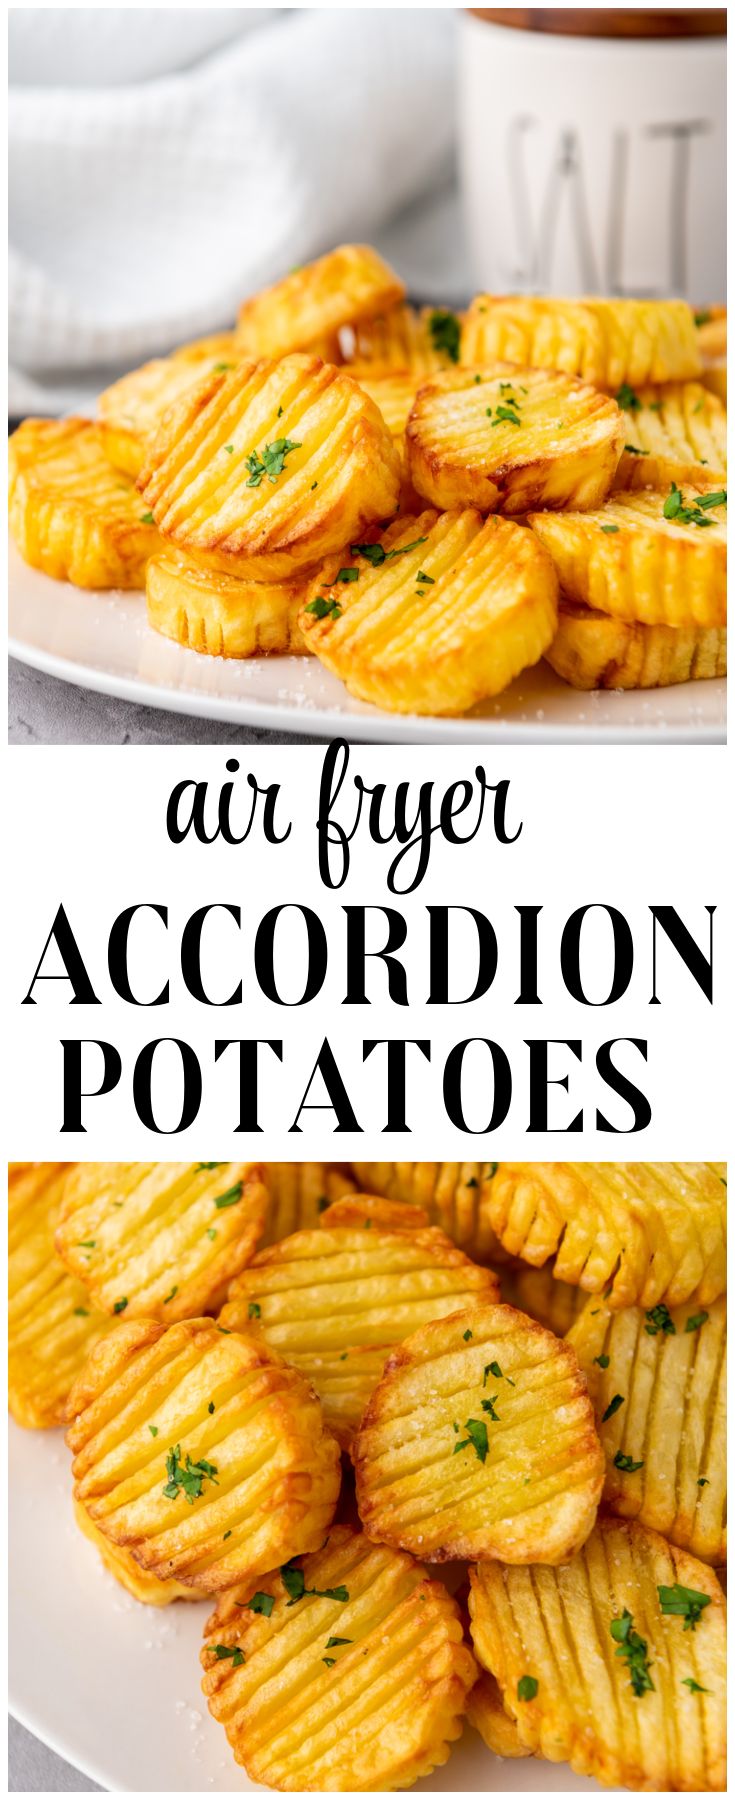 Delicious and easy, these Air Fryer Accordion Potatoes come together in less than 30 minutes with just 3 basic ingredients!    #potatoes #accordion #airfryer #air #fryer #healthy